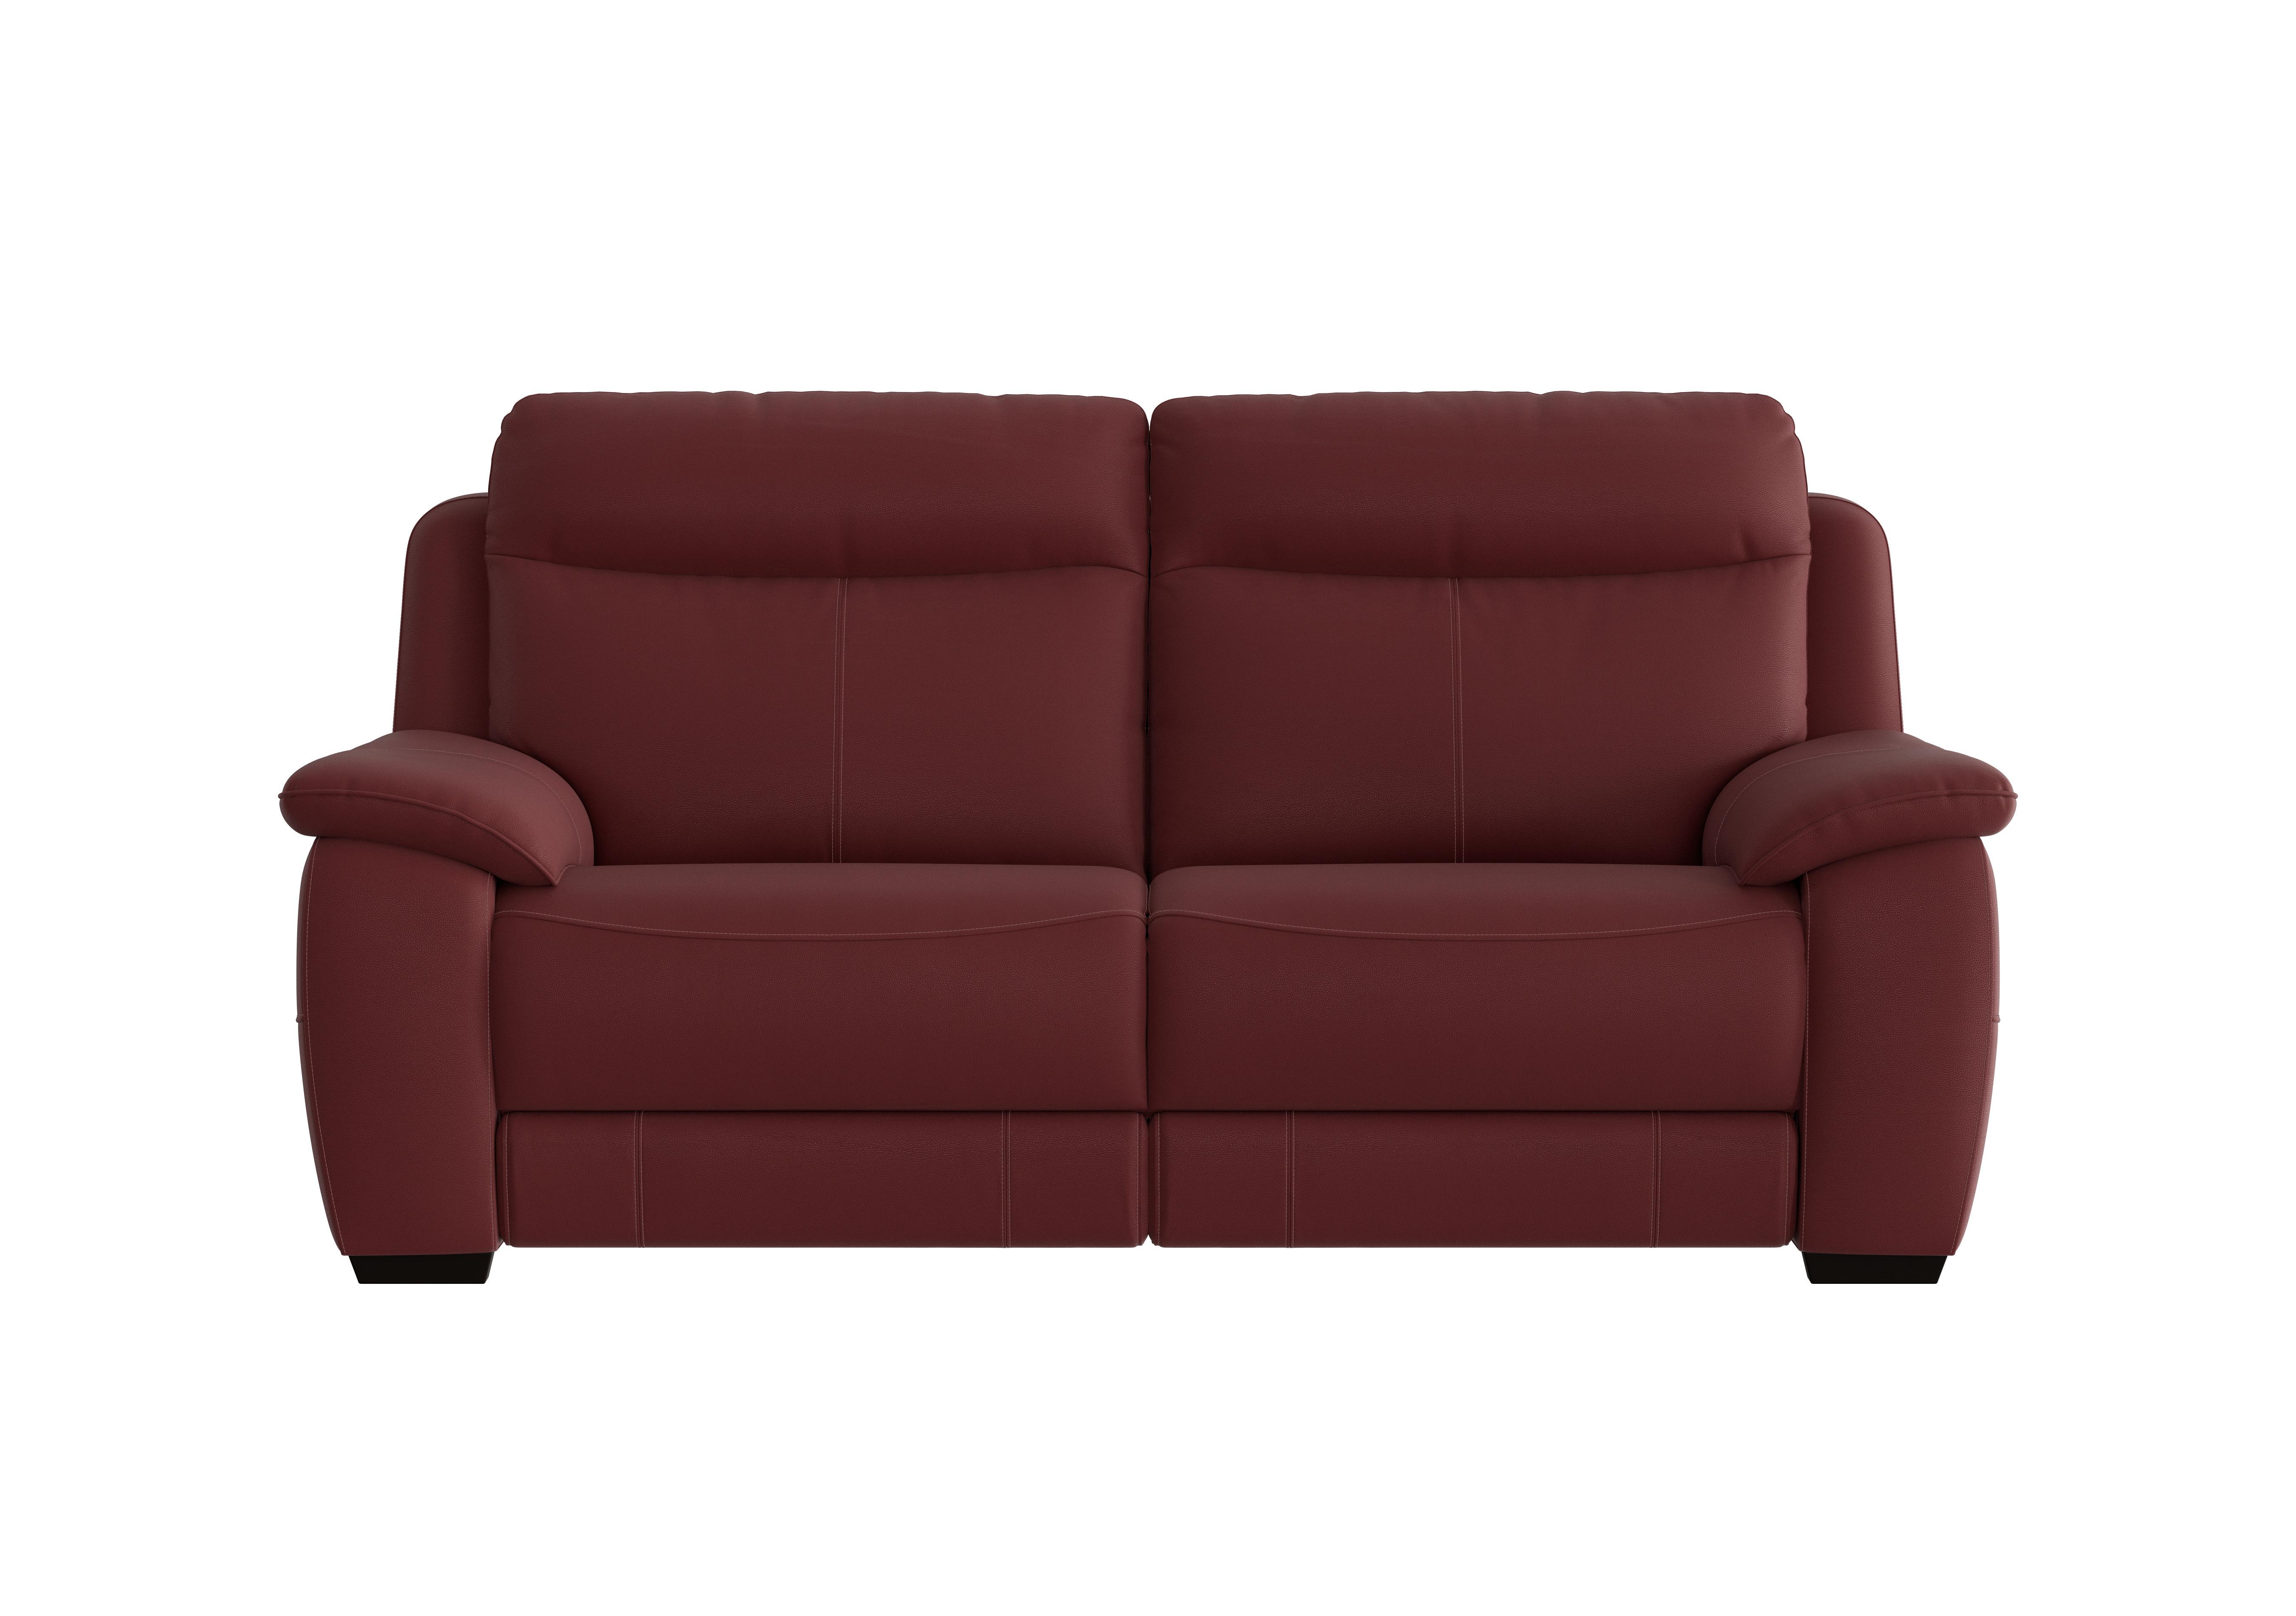 Starlight Express 3 Seater Leather Recliner Sofa with Power Headrests in Bv-035c Deep Red on Furniture Village